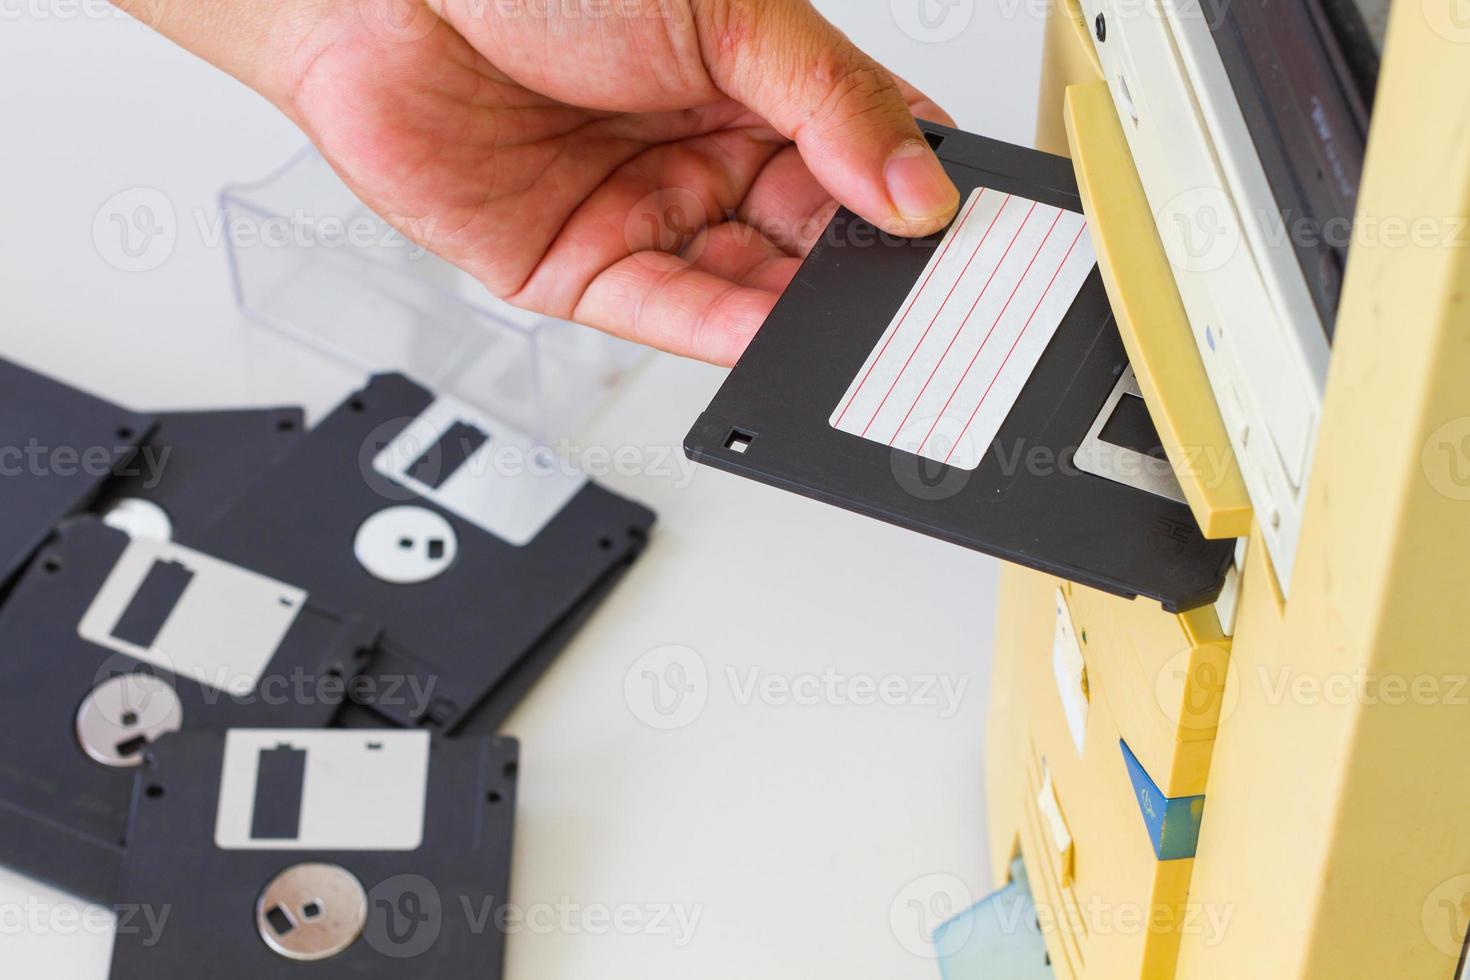 Hand inserting a 3.5-inch floppy disk into a floppy drive photo